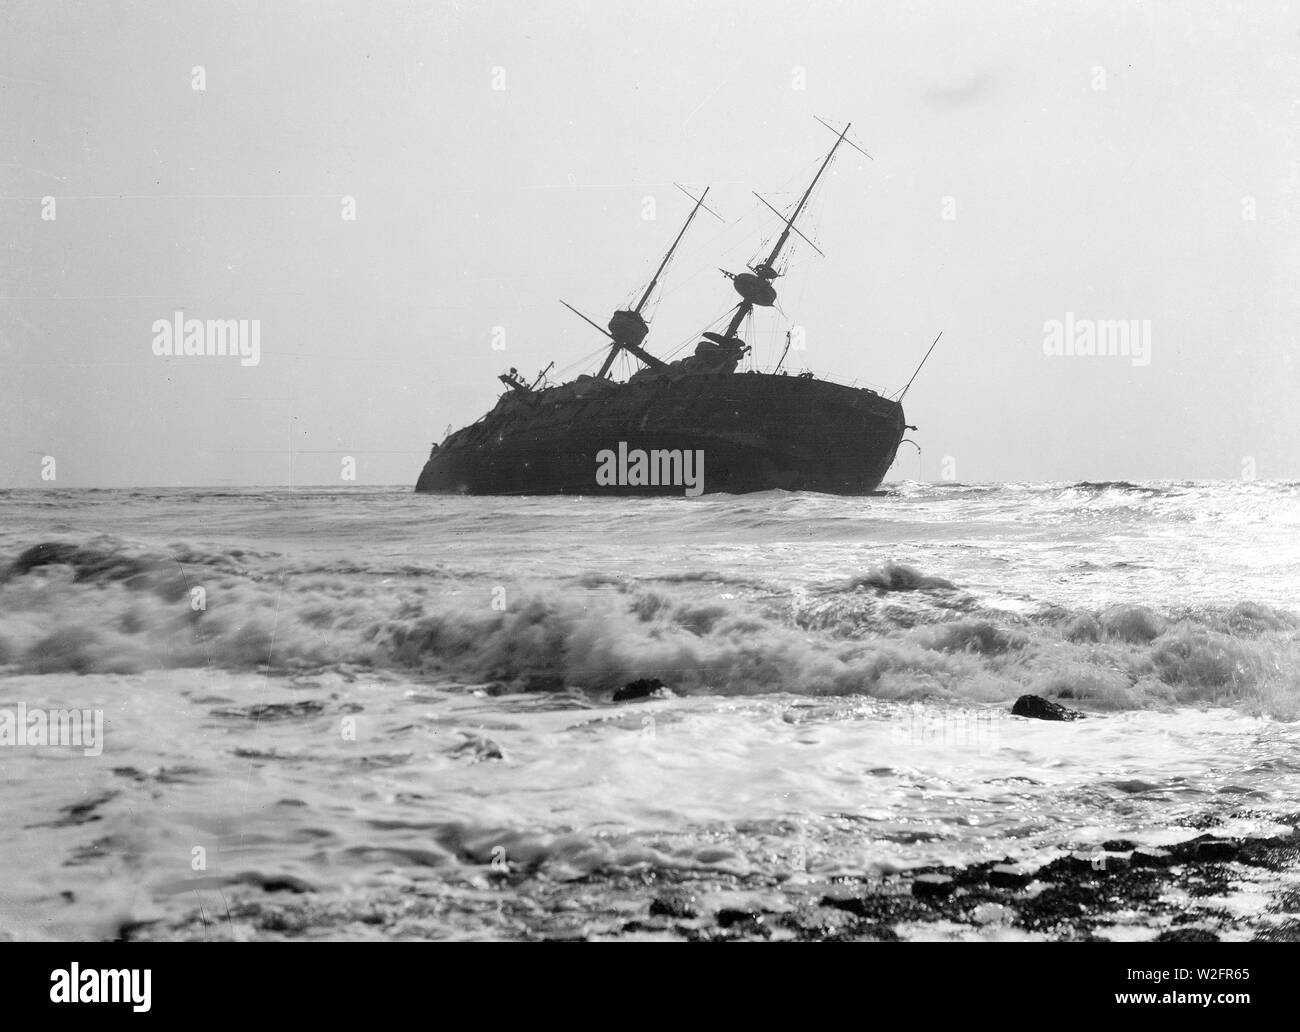 The British battleship H.M.S. Prince George with a blow after stranding for the Hondsbossche Seawall on December 28, 1921 Stock Photo